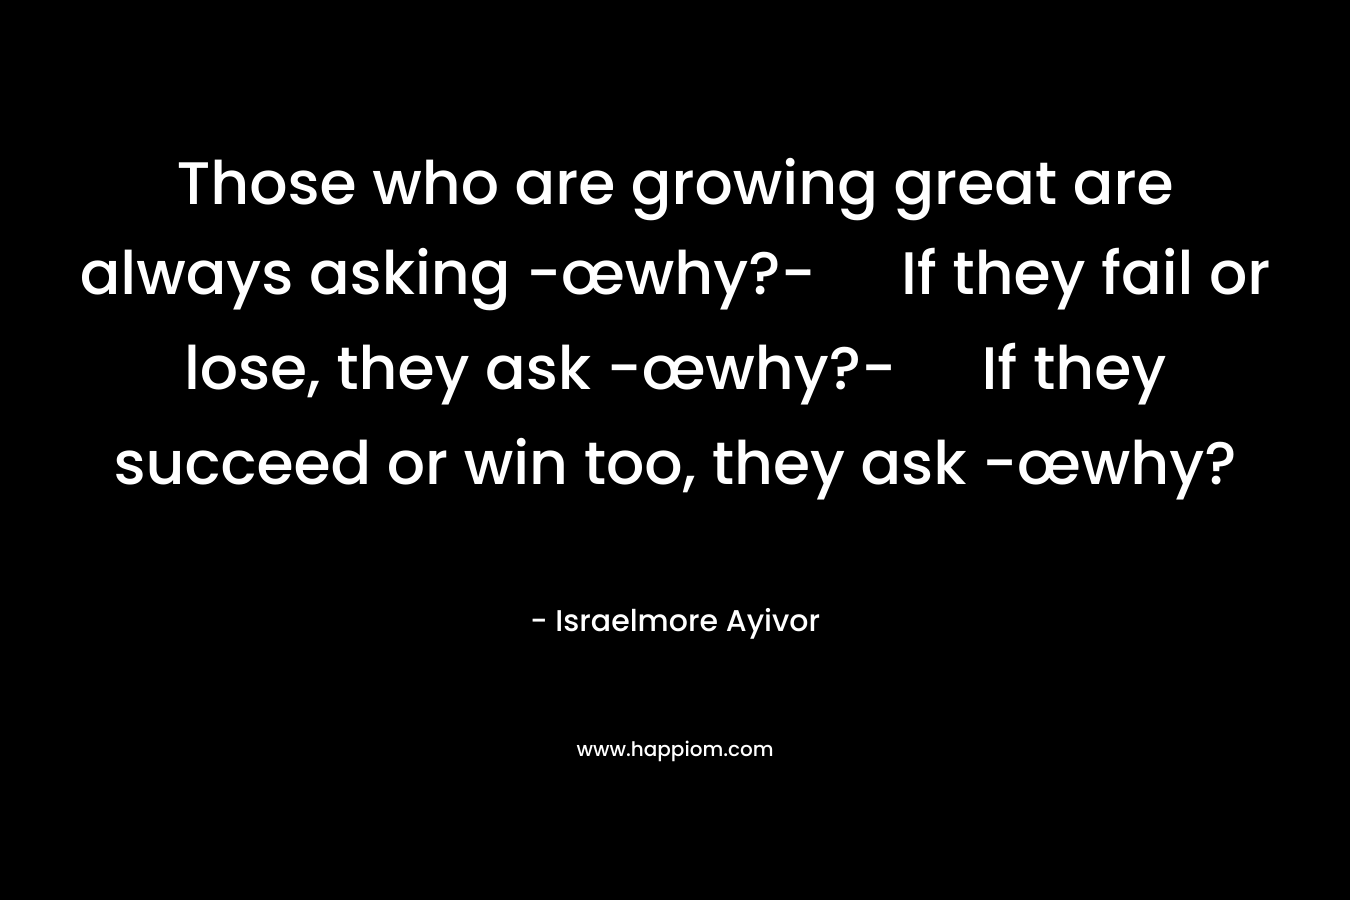 Those who are growing great are always asking -œwhy?- If they fail or lose, they ask -œwhy?- If they succeed or win too, they ask -œwhy?